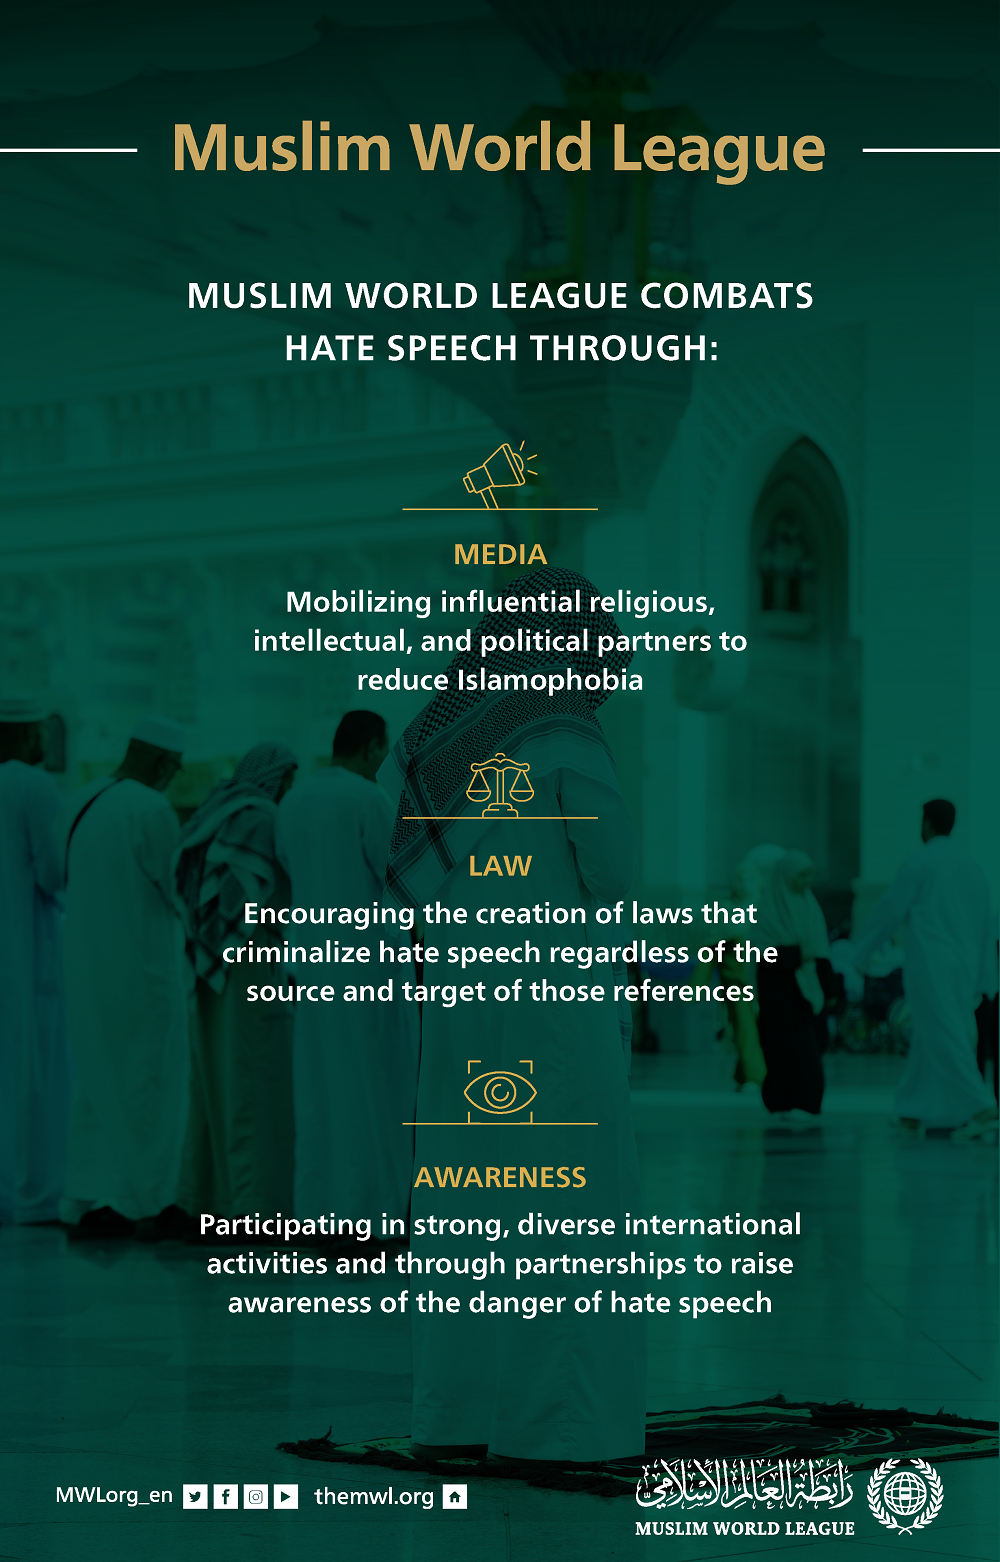 MWL combats hate speech through media, law and awareness.